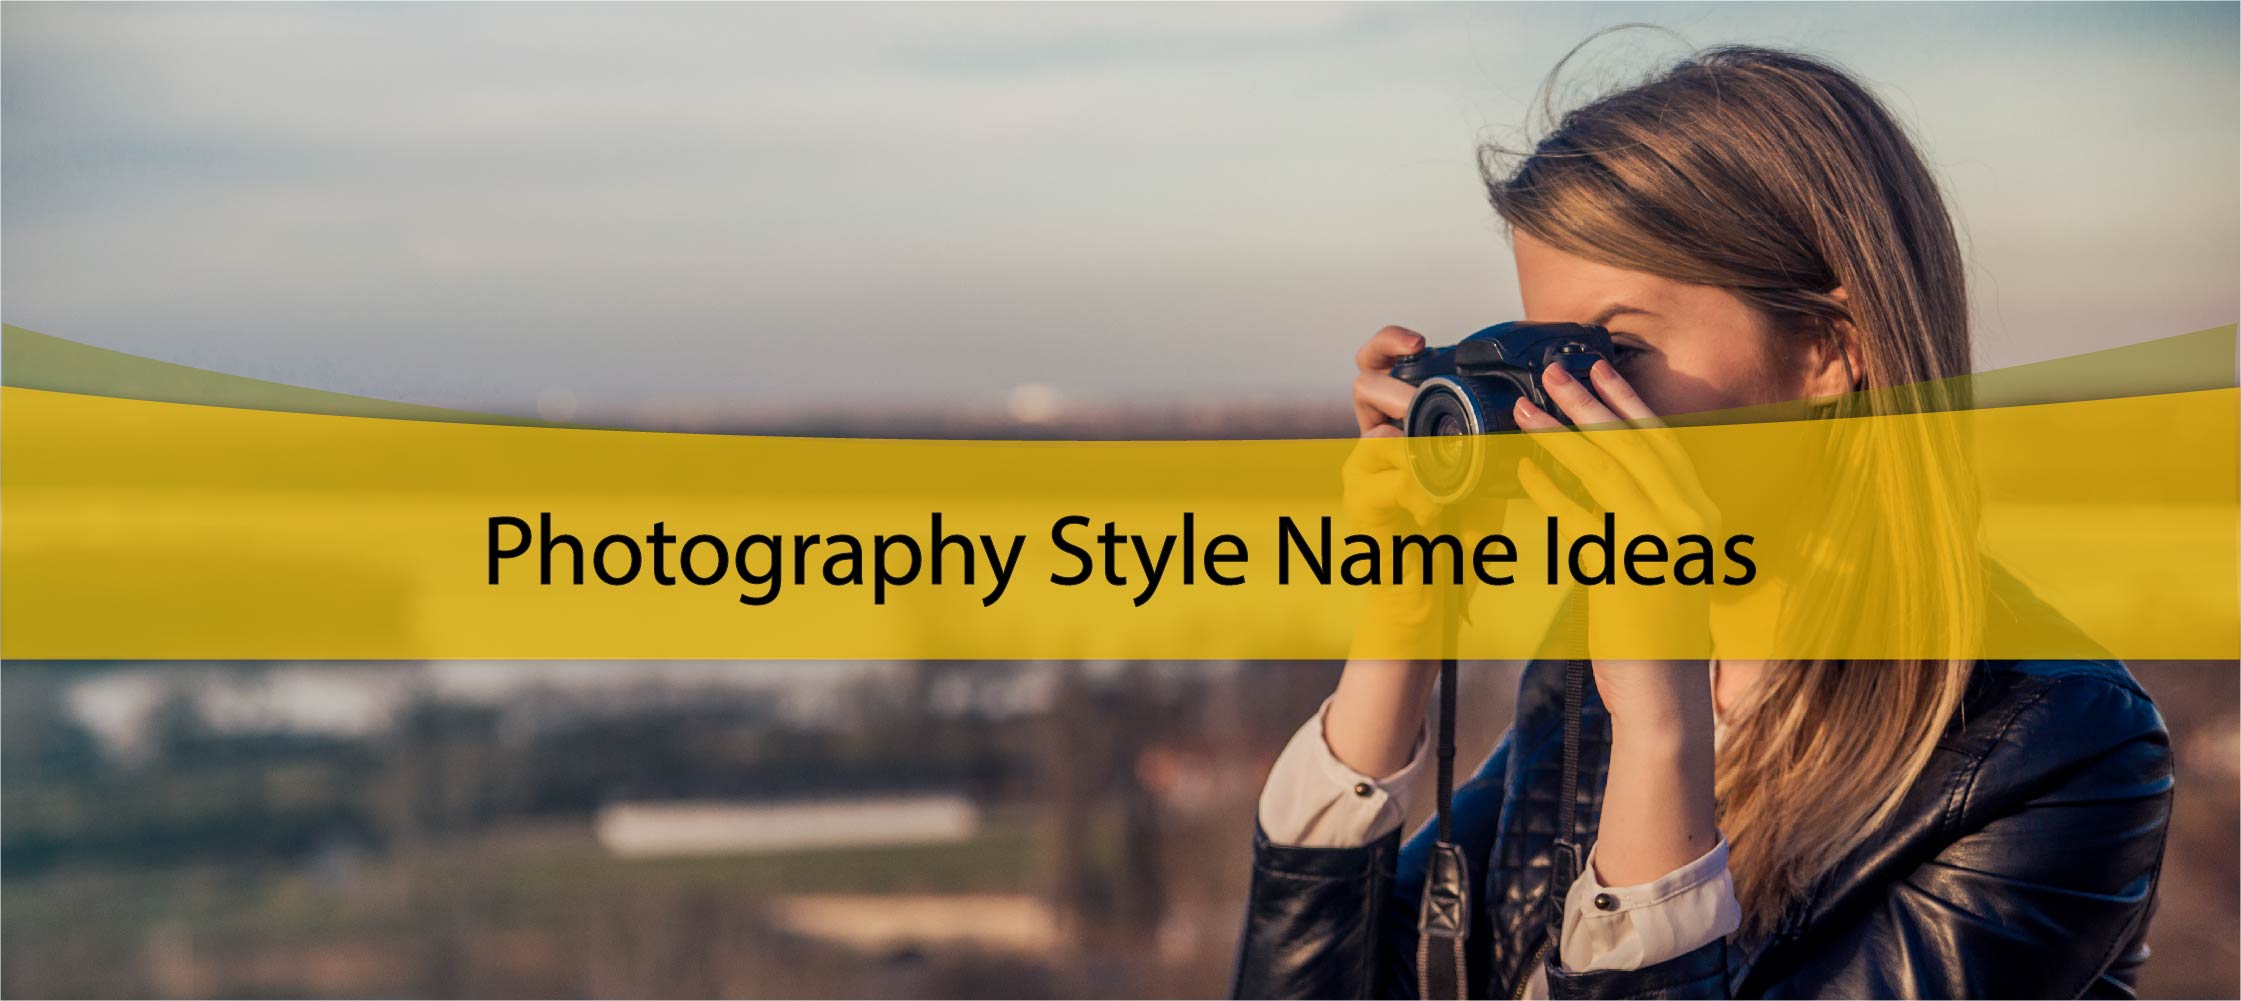   Photography Style Name Ideas